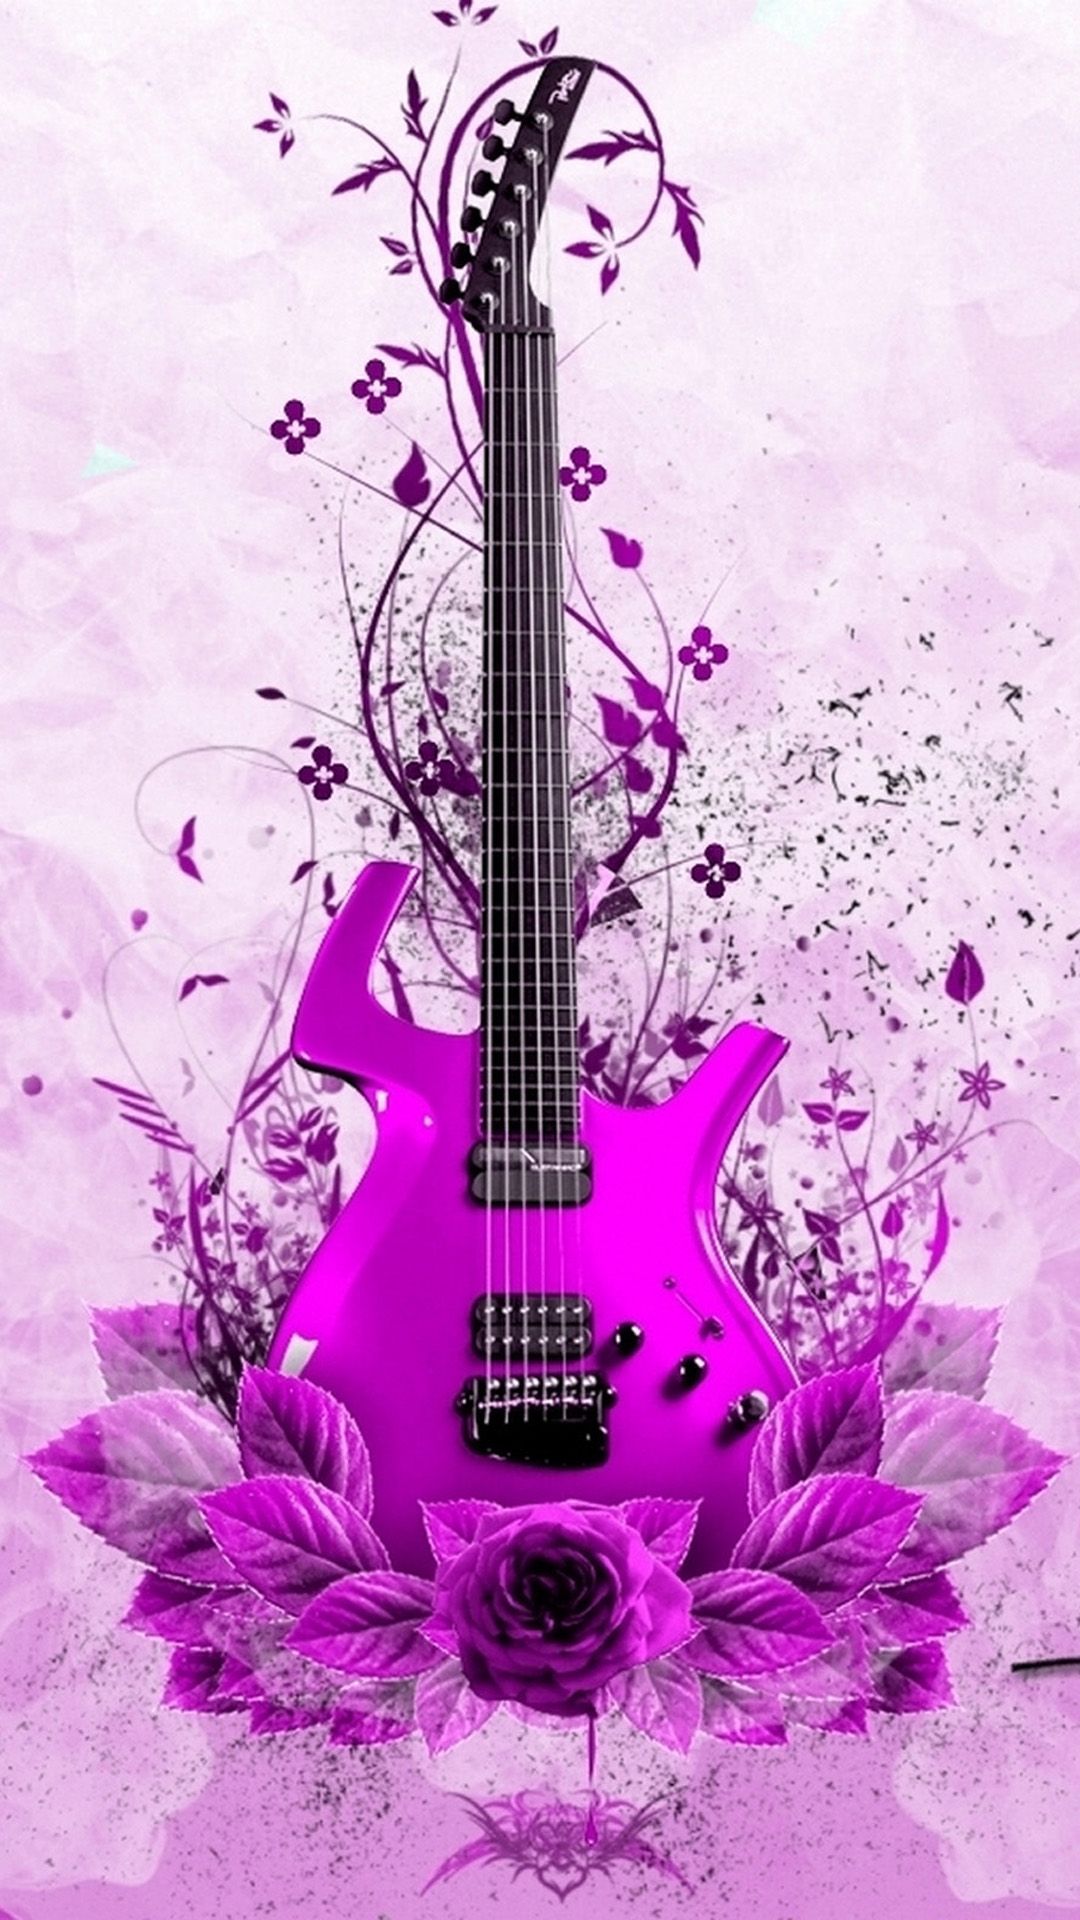 Abstract Music Guitar Instrument #iPhone #plus #wallpaper. Pink guitar wallpaper, iPhone 6 plus wallpaper, Guitar wallpaper iphone